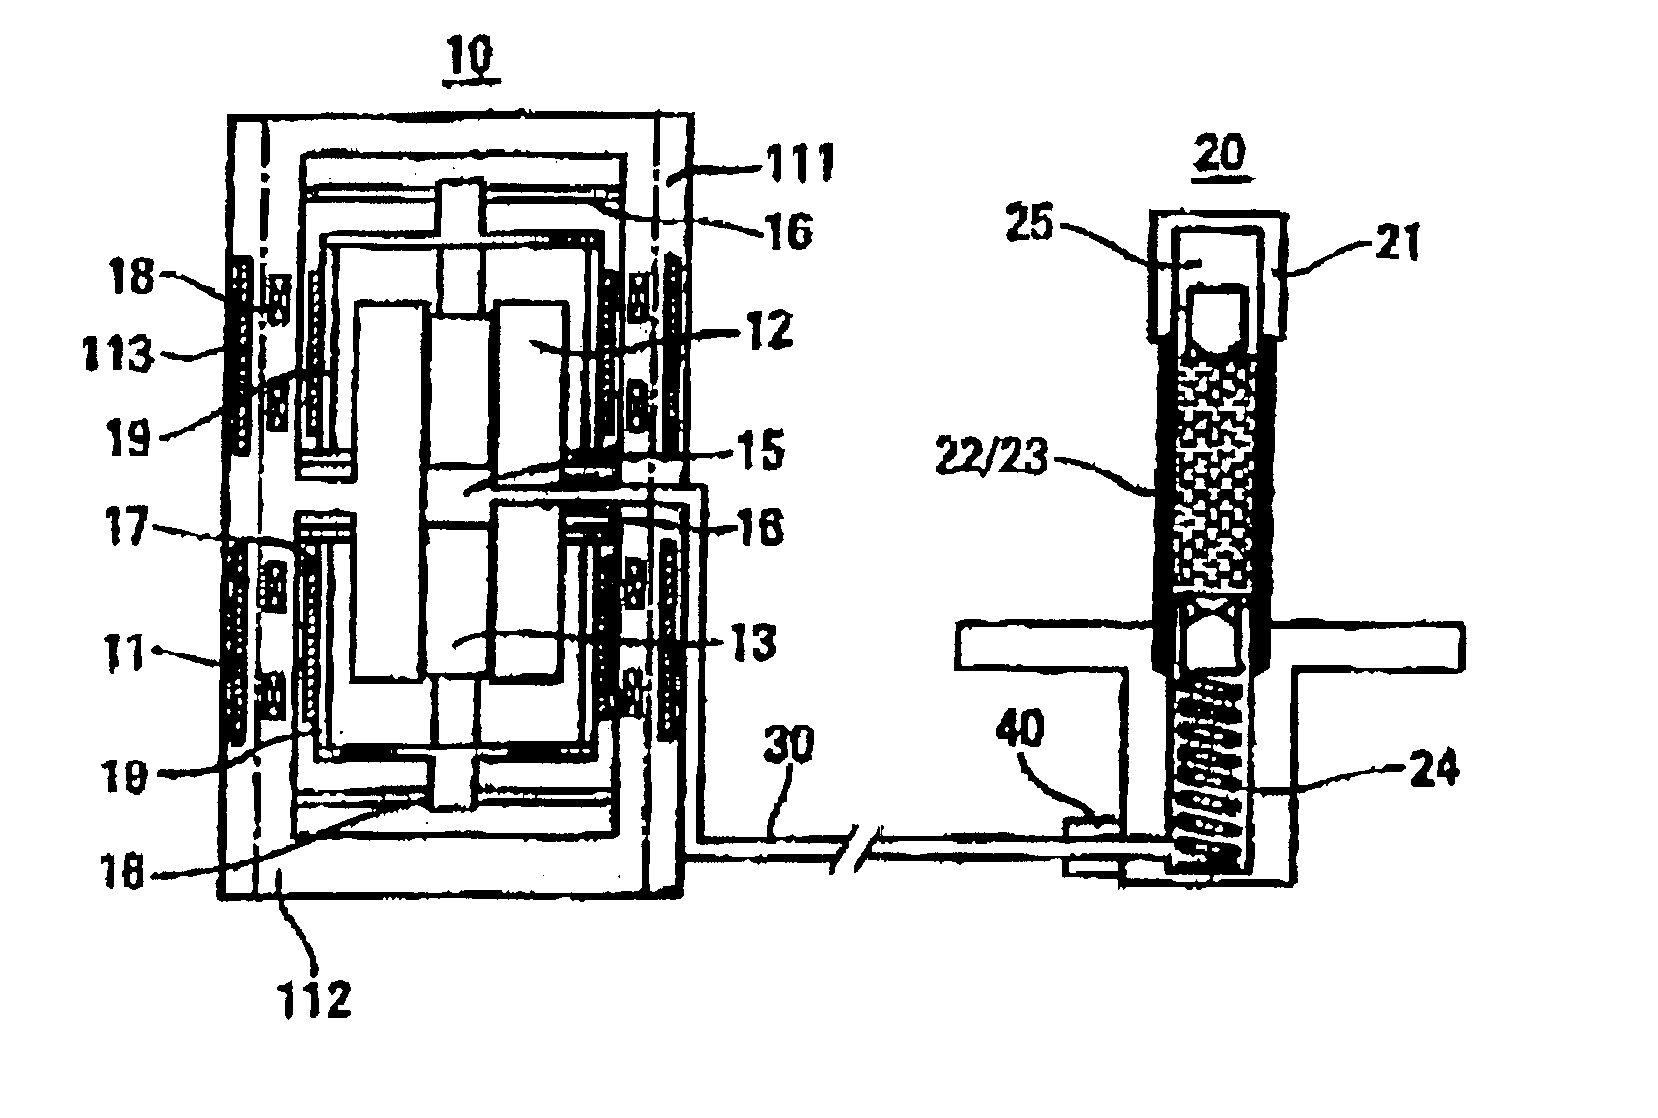 Compressor cooler and its assembly procedure